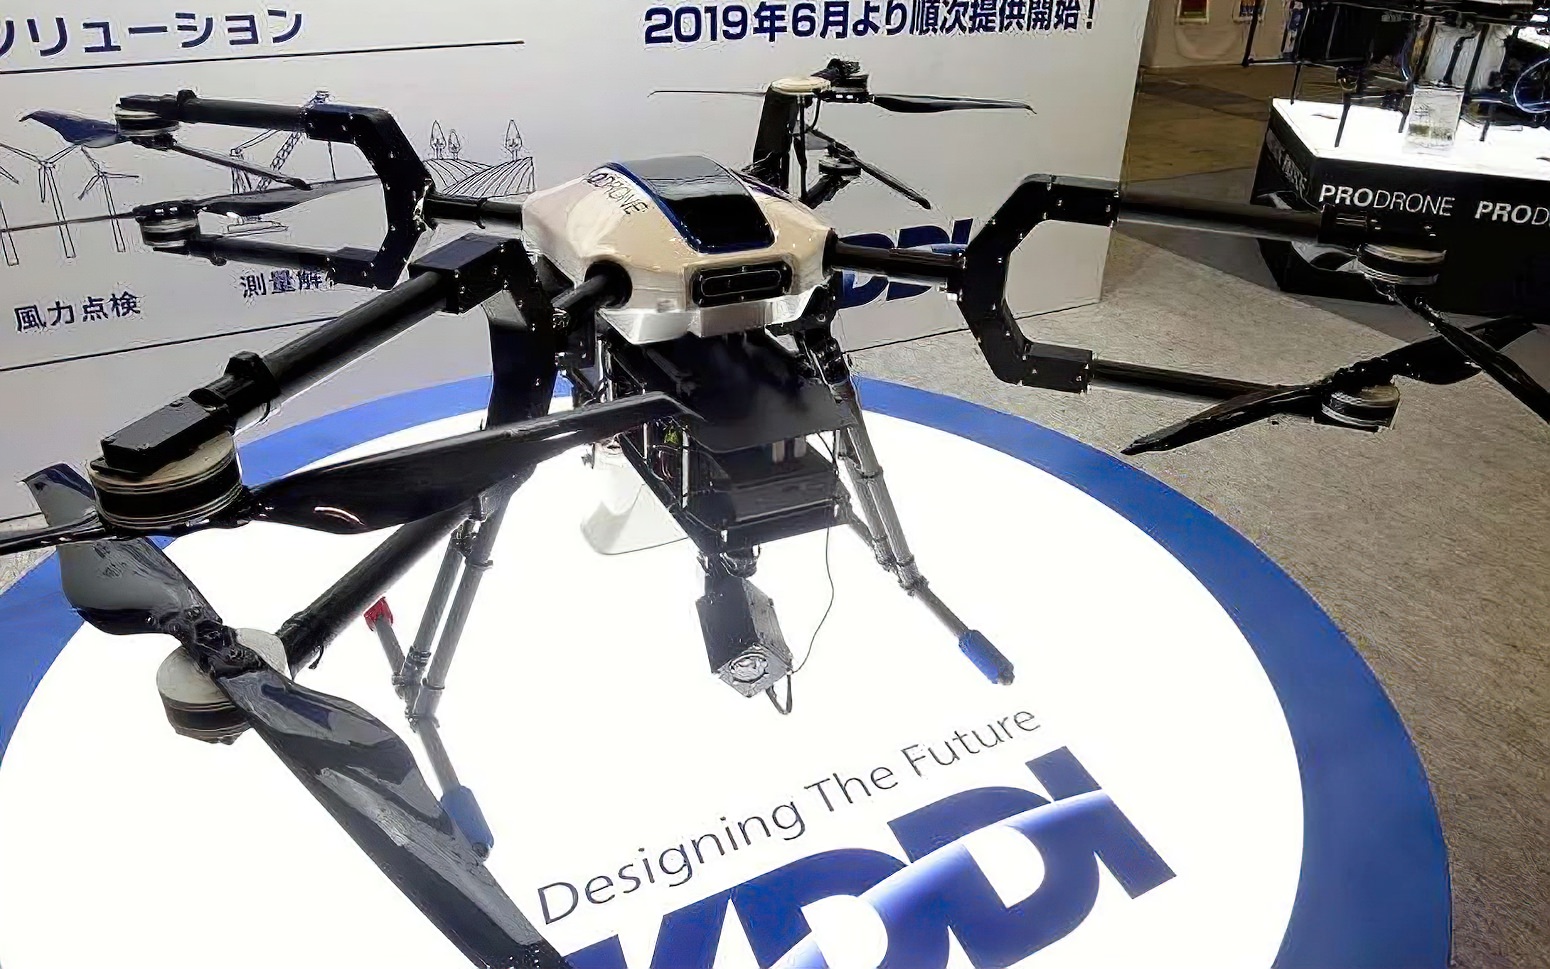 Commercial drone use is set to take off in Japan with deregulation